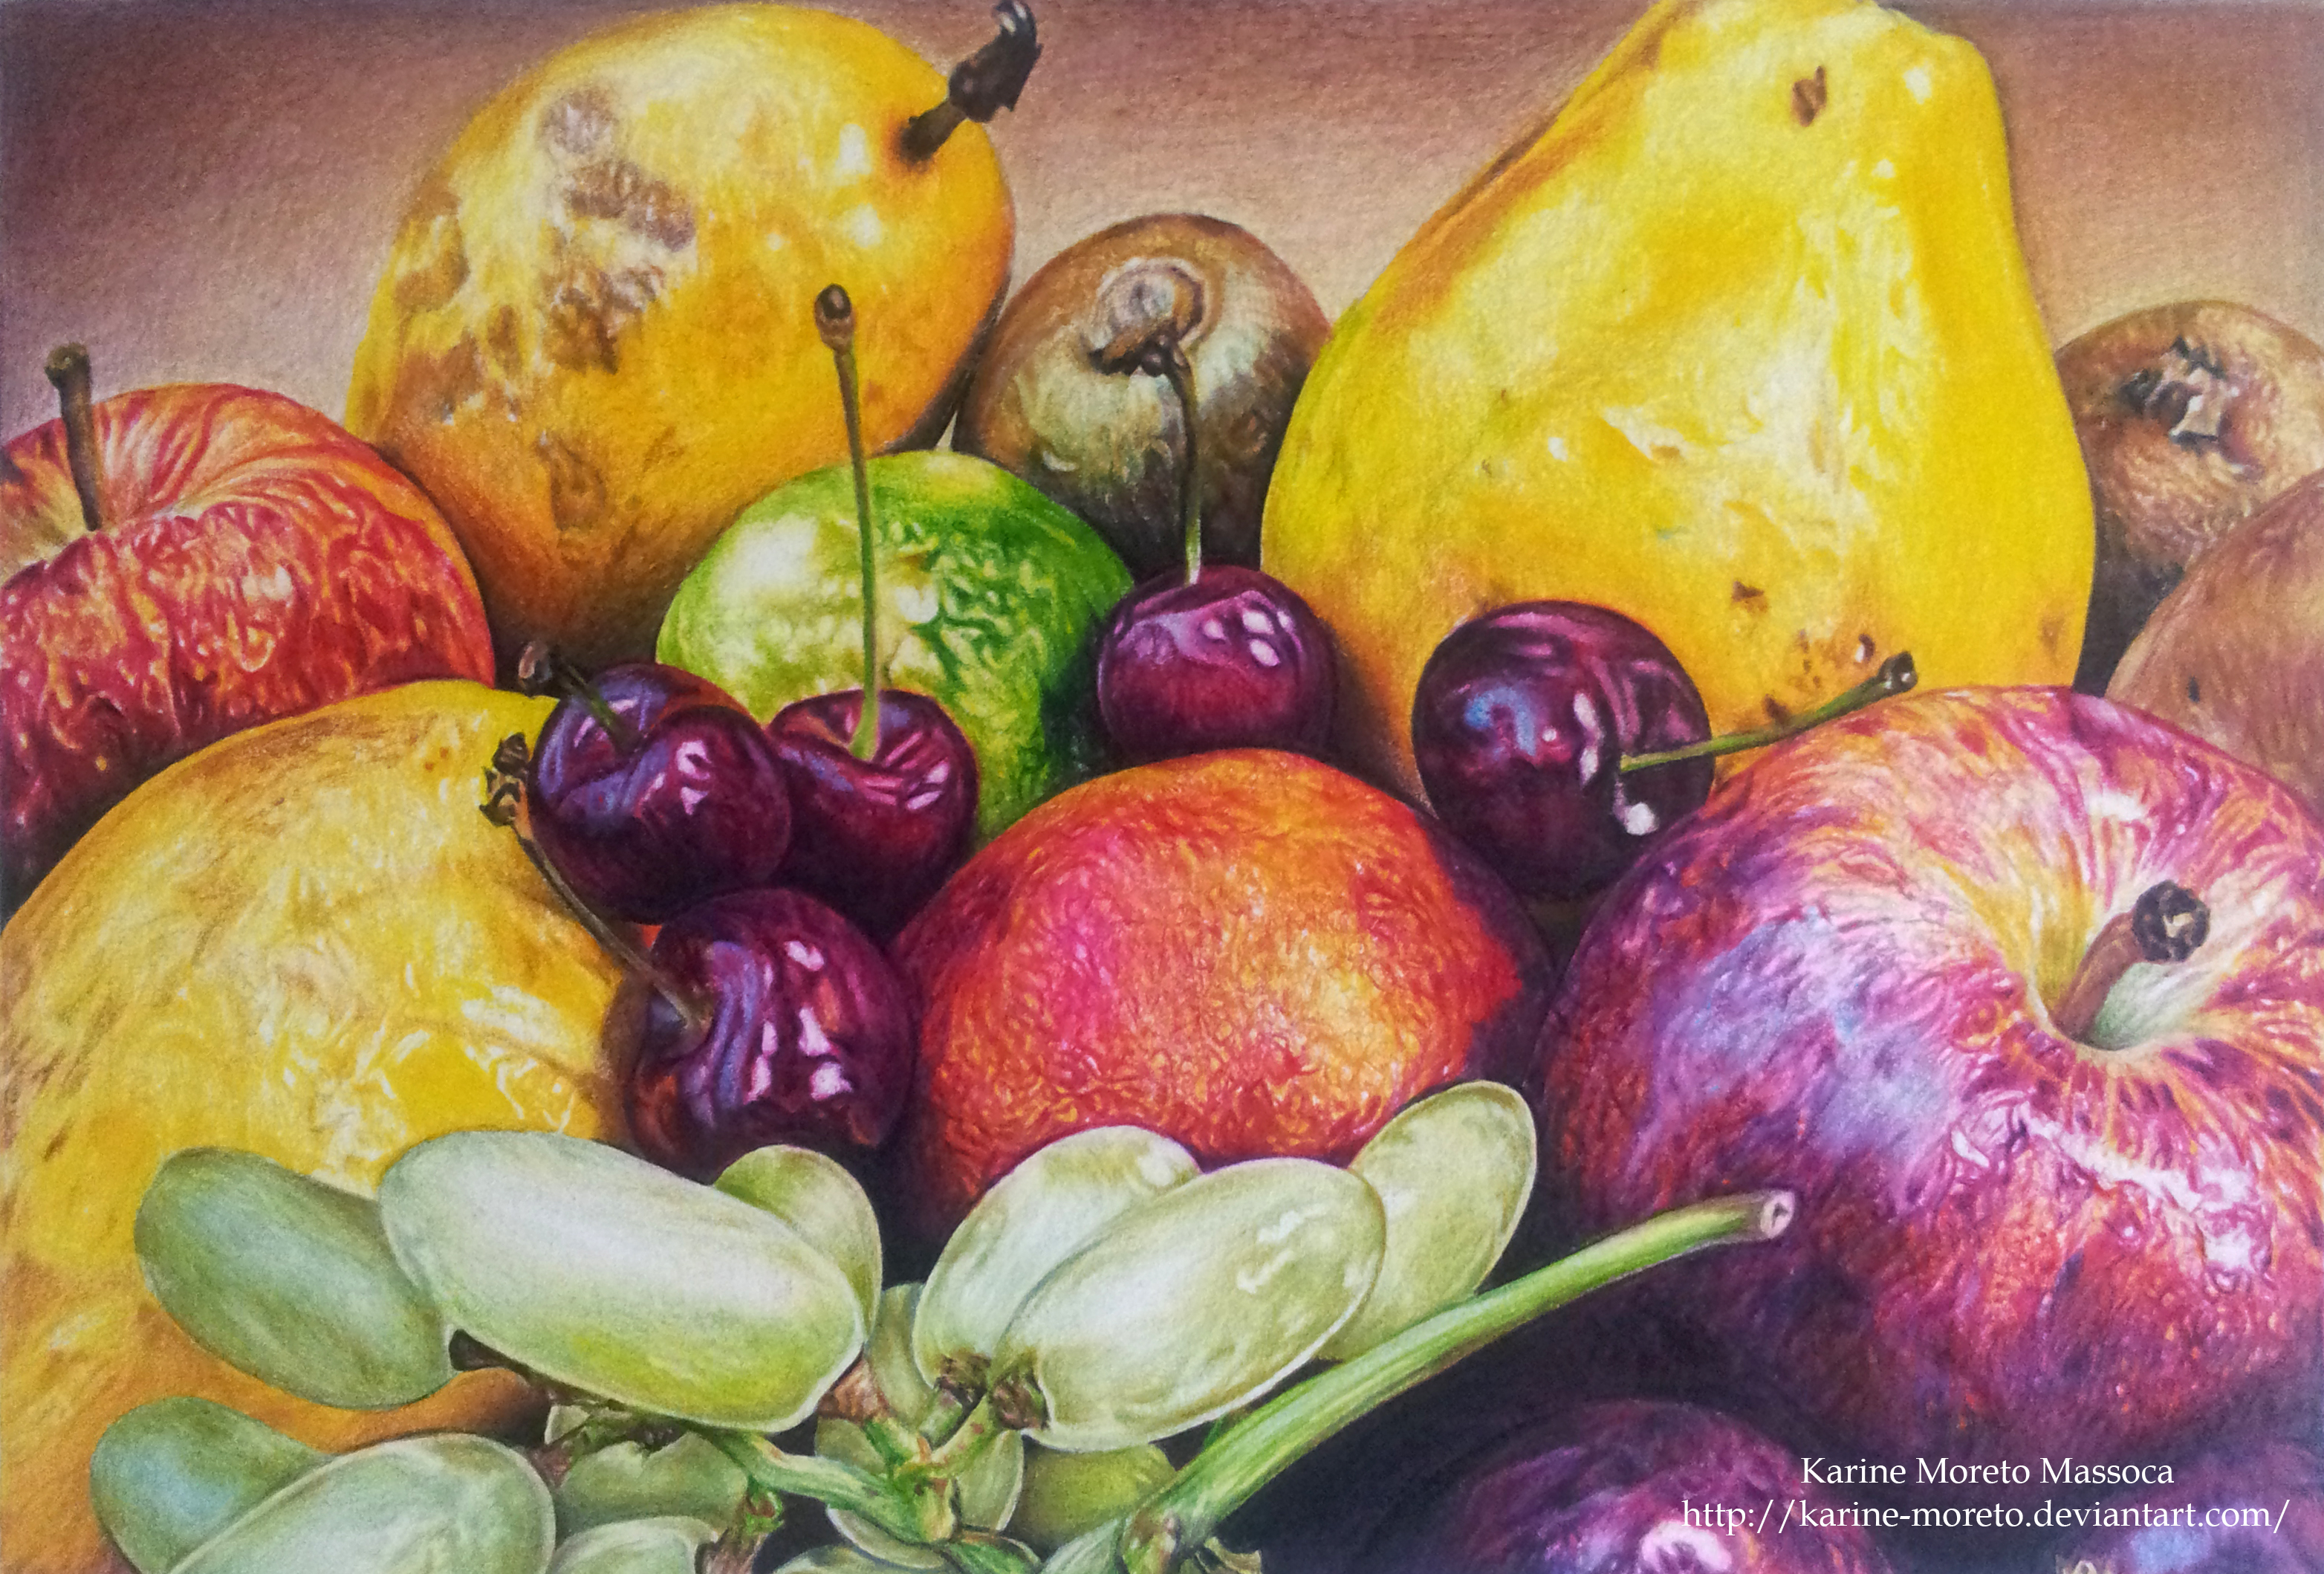 My still life drawing with colored pencils by korkmazart on DeviantArt